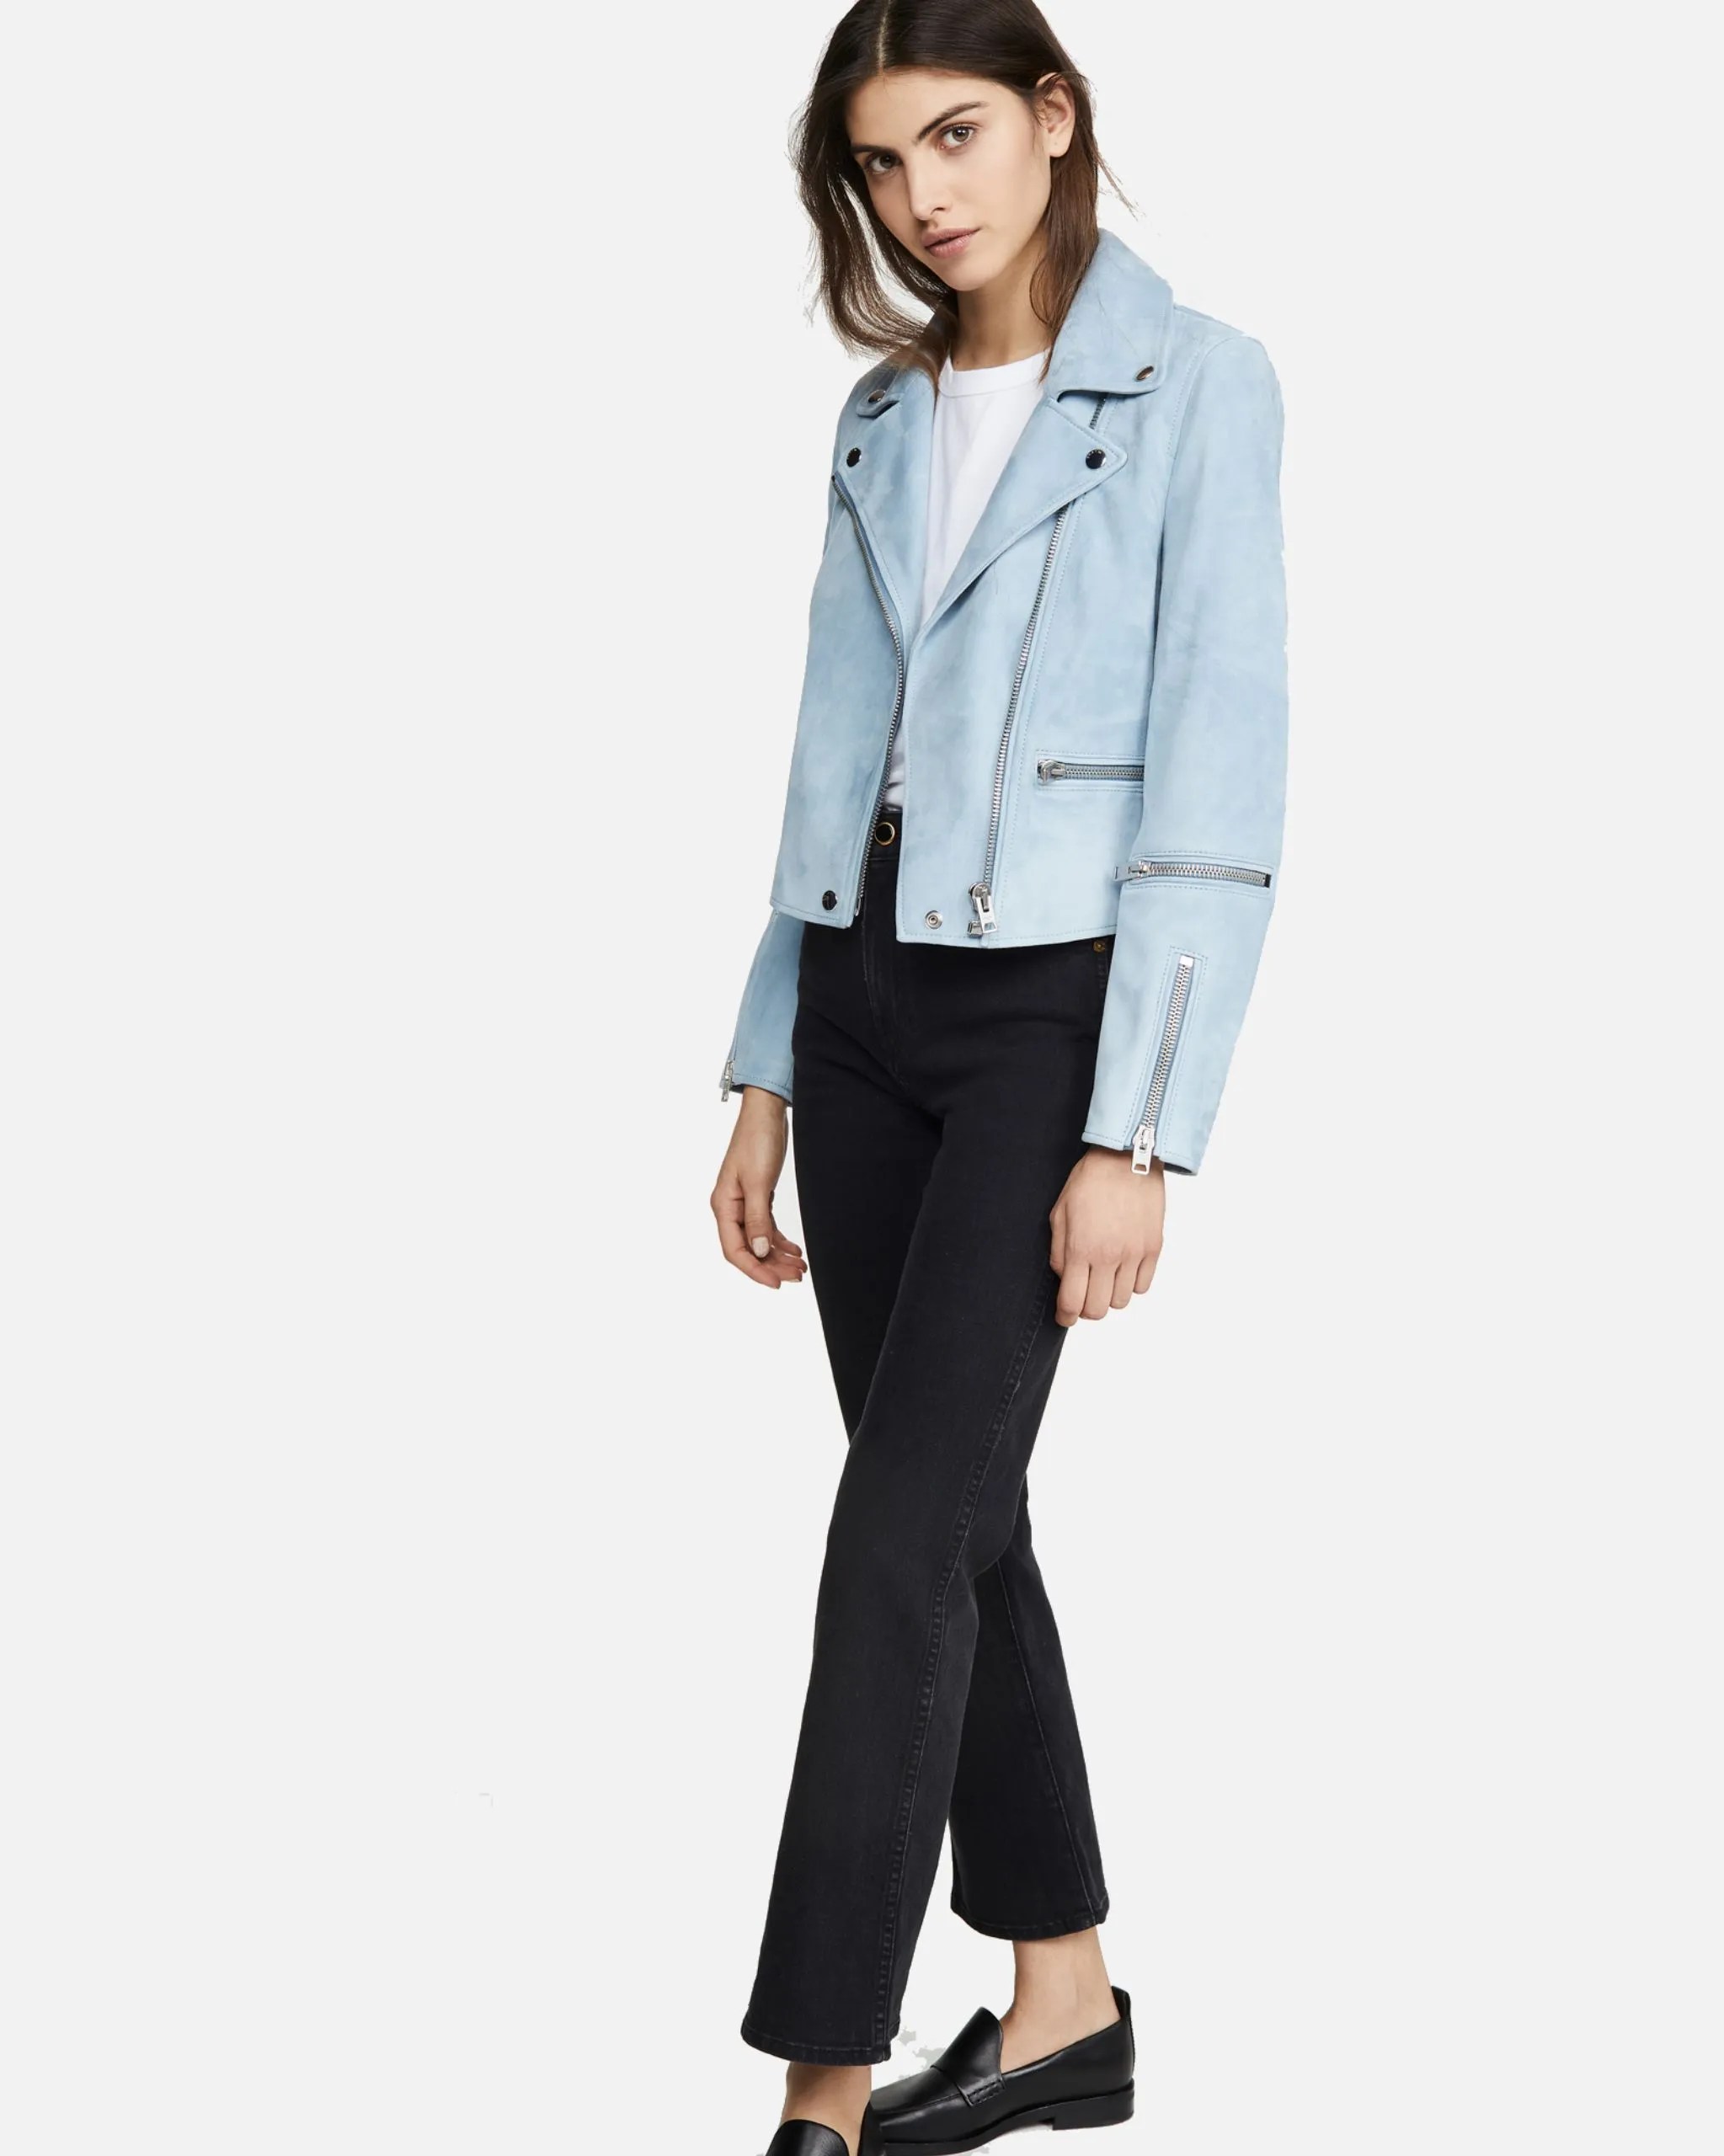 stylish-womens-pale-blue-suede-leather-jacket-on-sale-now (3)